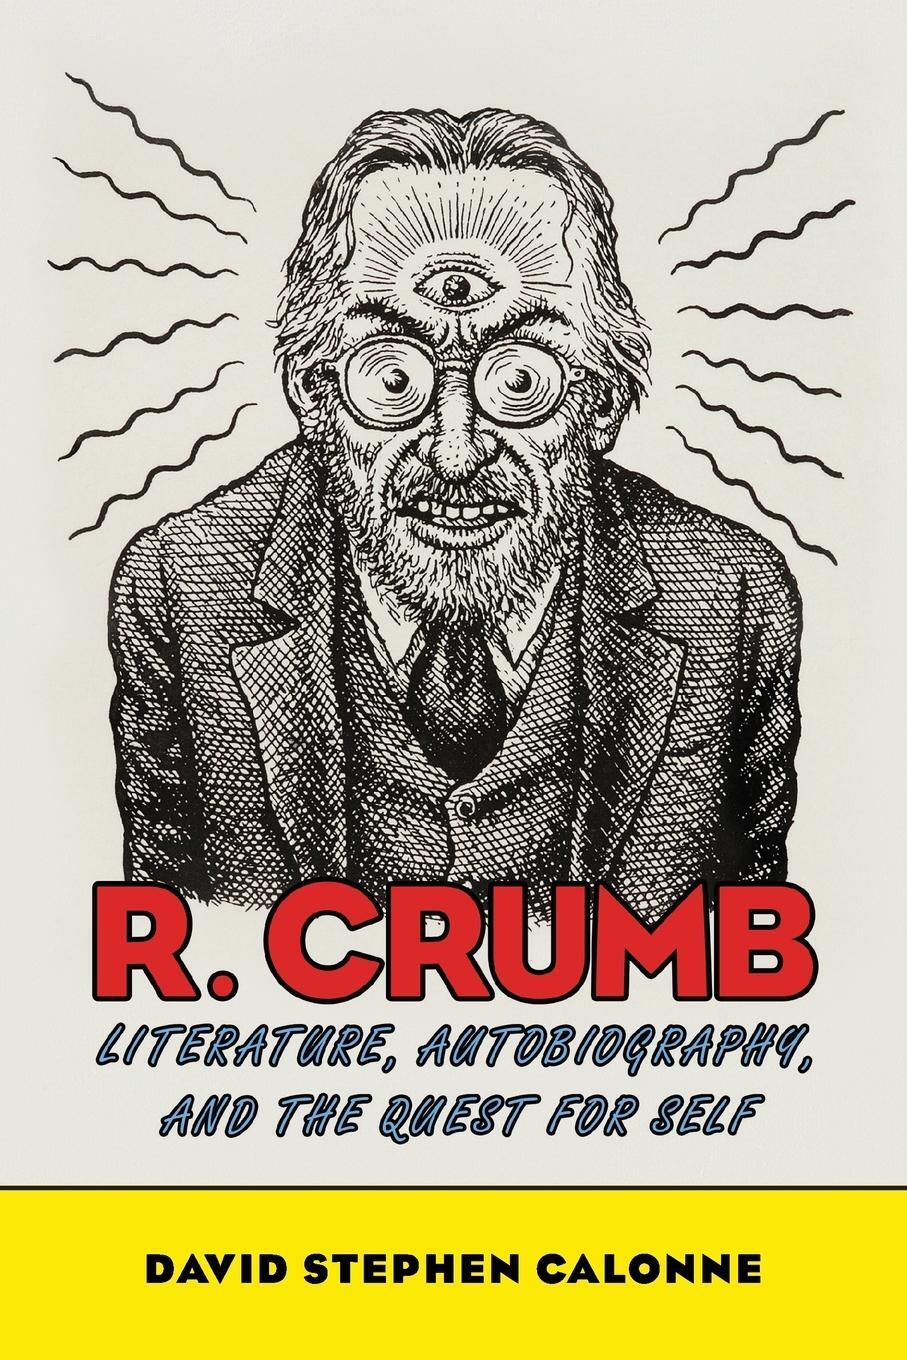 Cover: 9781496831866 | R. Crumb | Literature, Autobiography, and the Quest for Self | Calonne